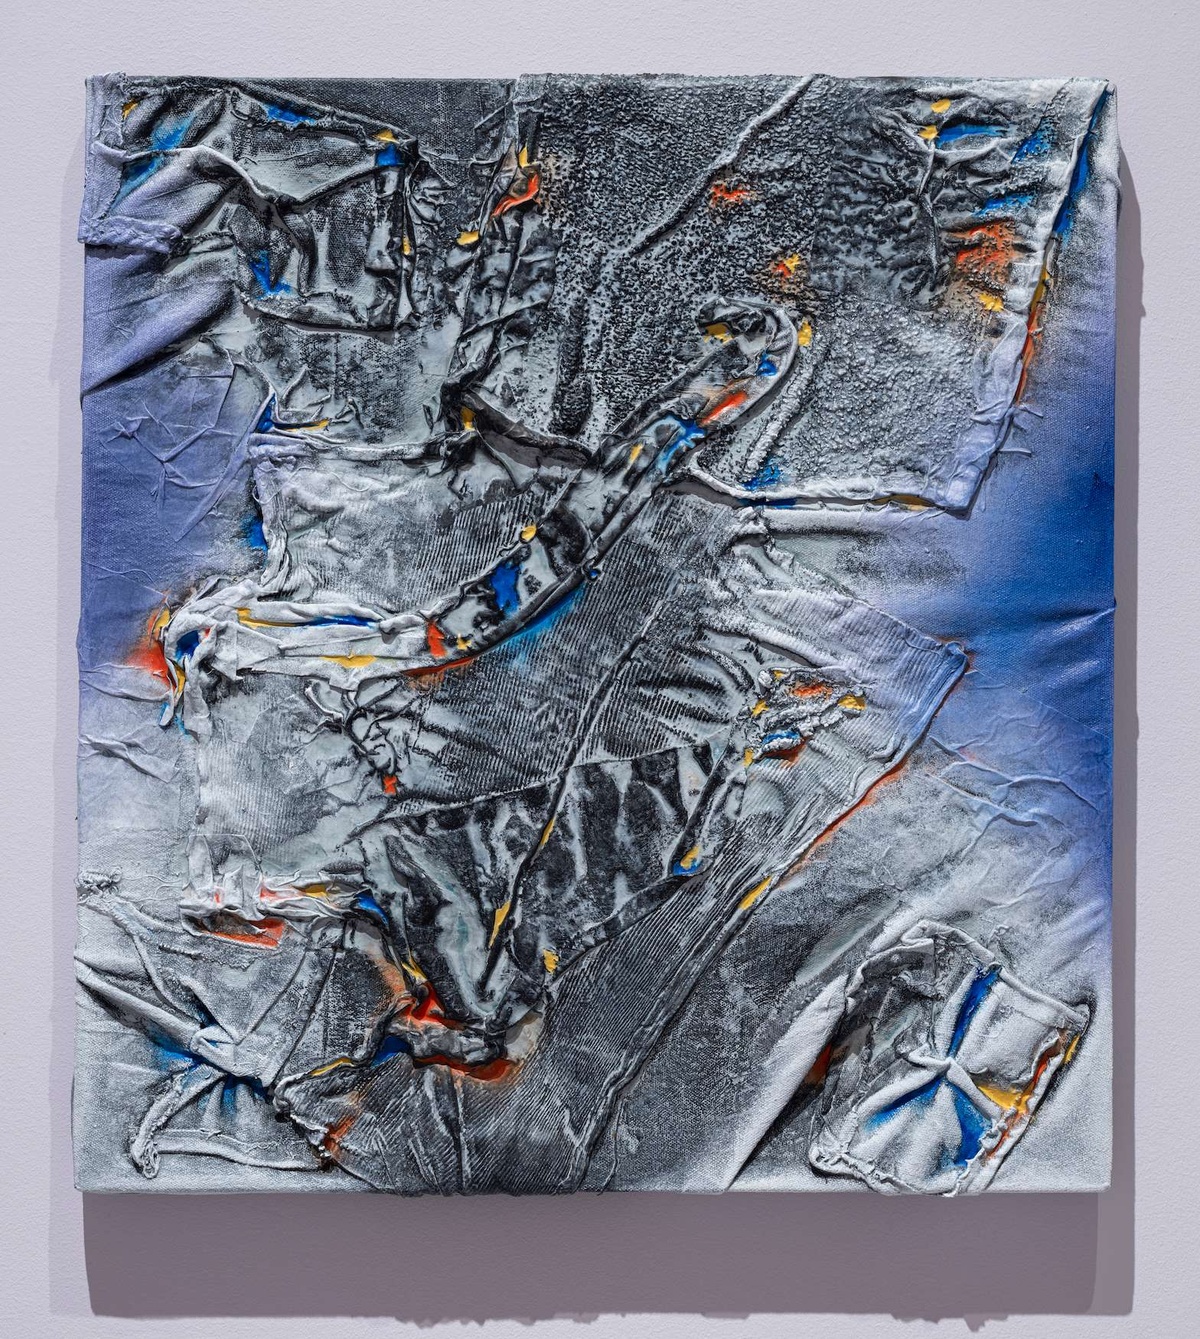 Richly textured abstract work by Leslie Martinez. The surface resembles the texture of denim.